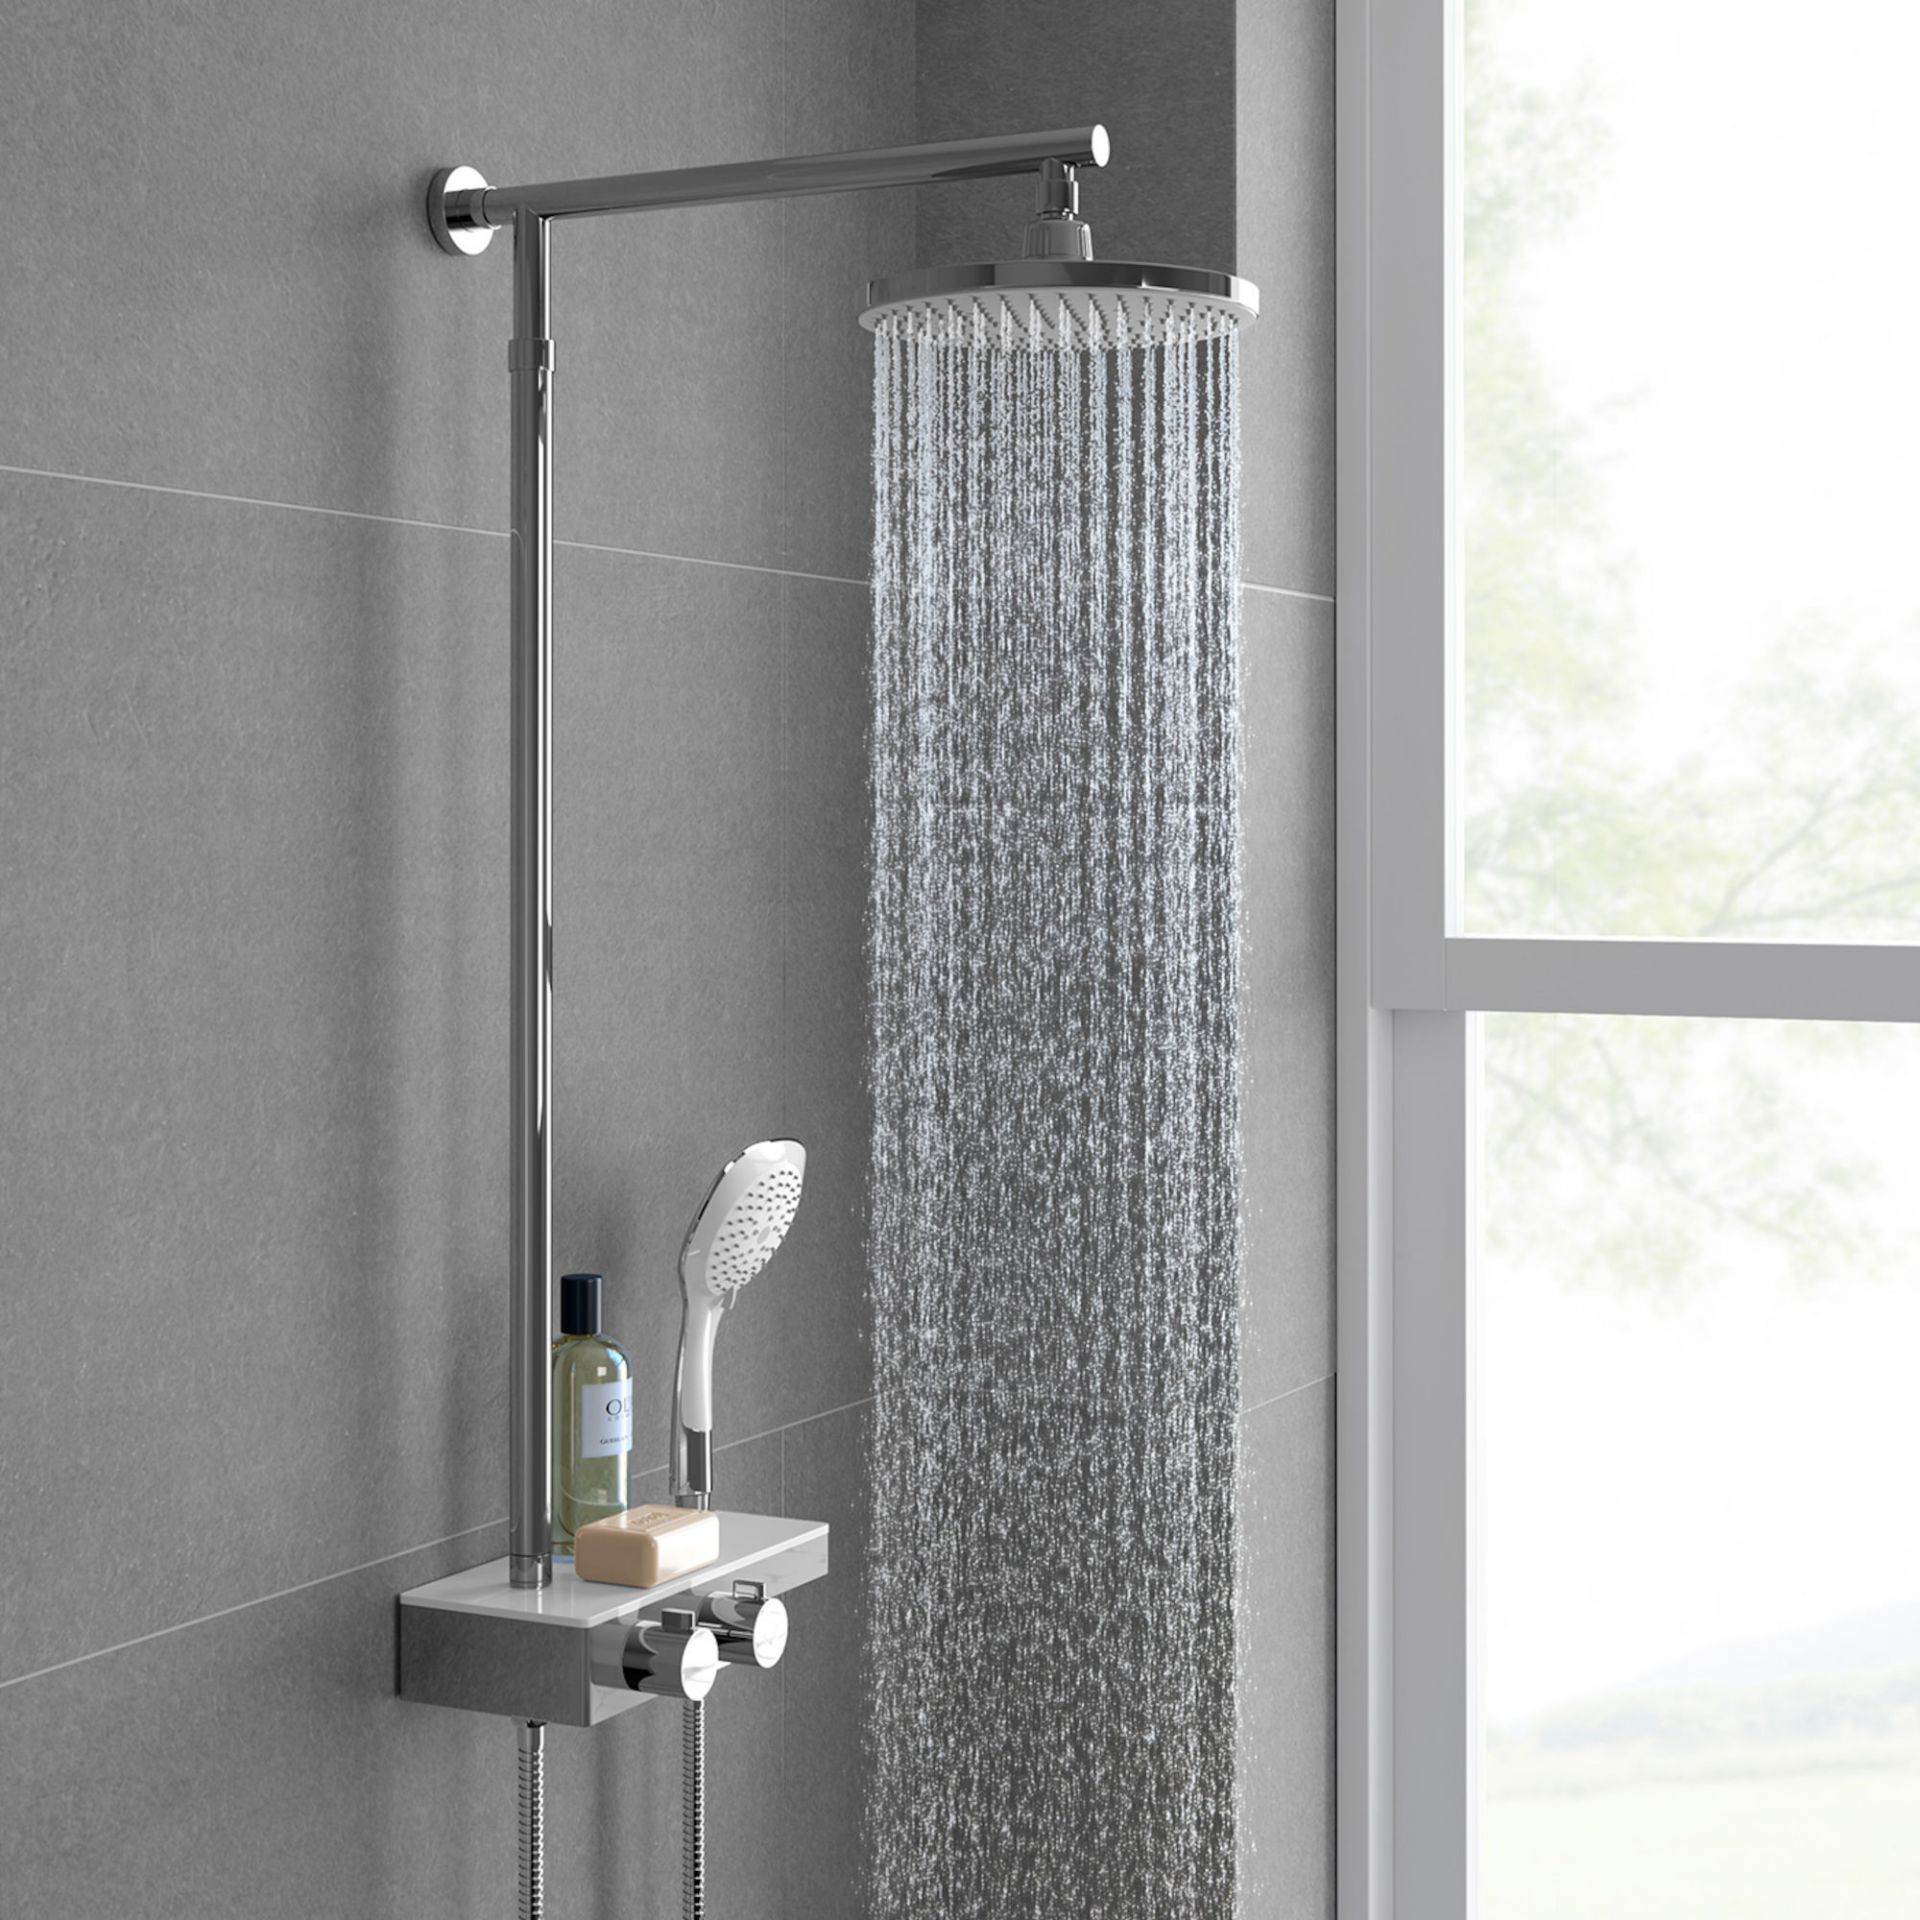 (KL181) Round Exposed Thermostatic Mixer Shower Kit Medium Head & Shelf. Cool to touch shower for